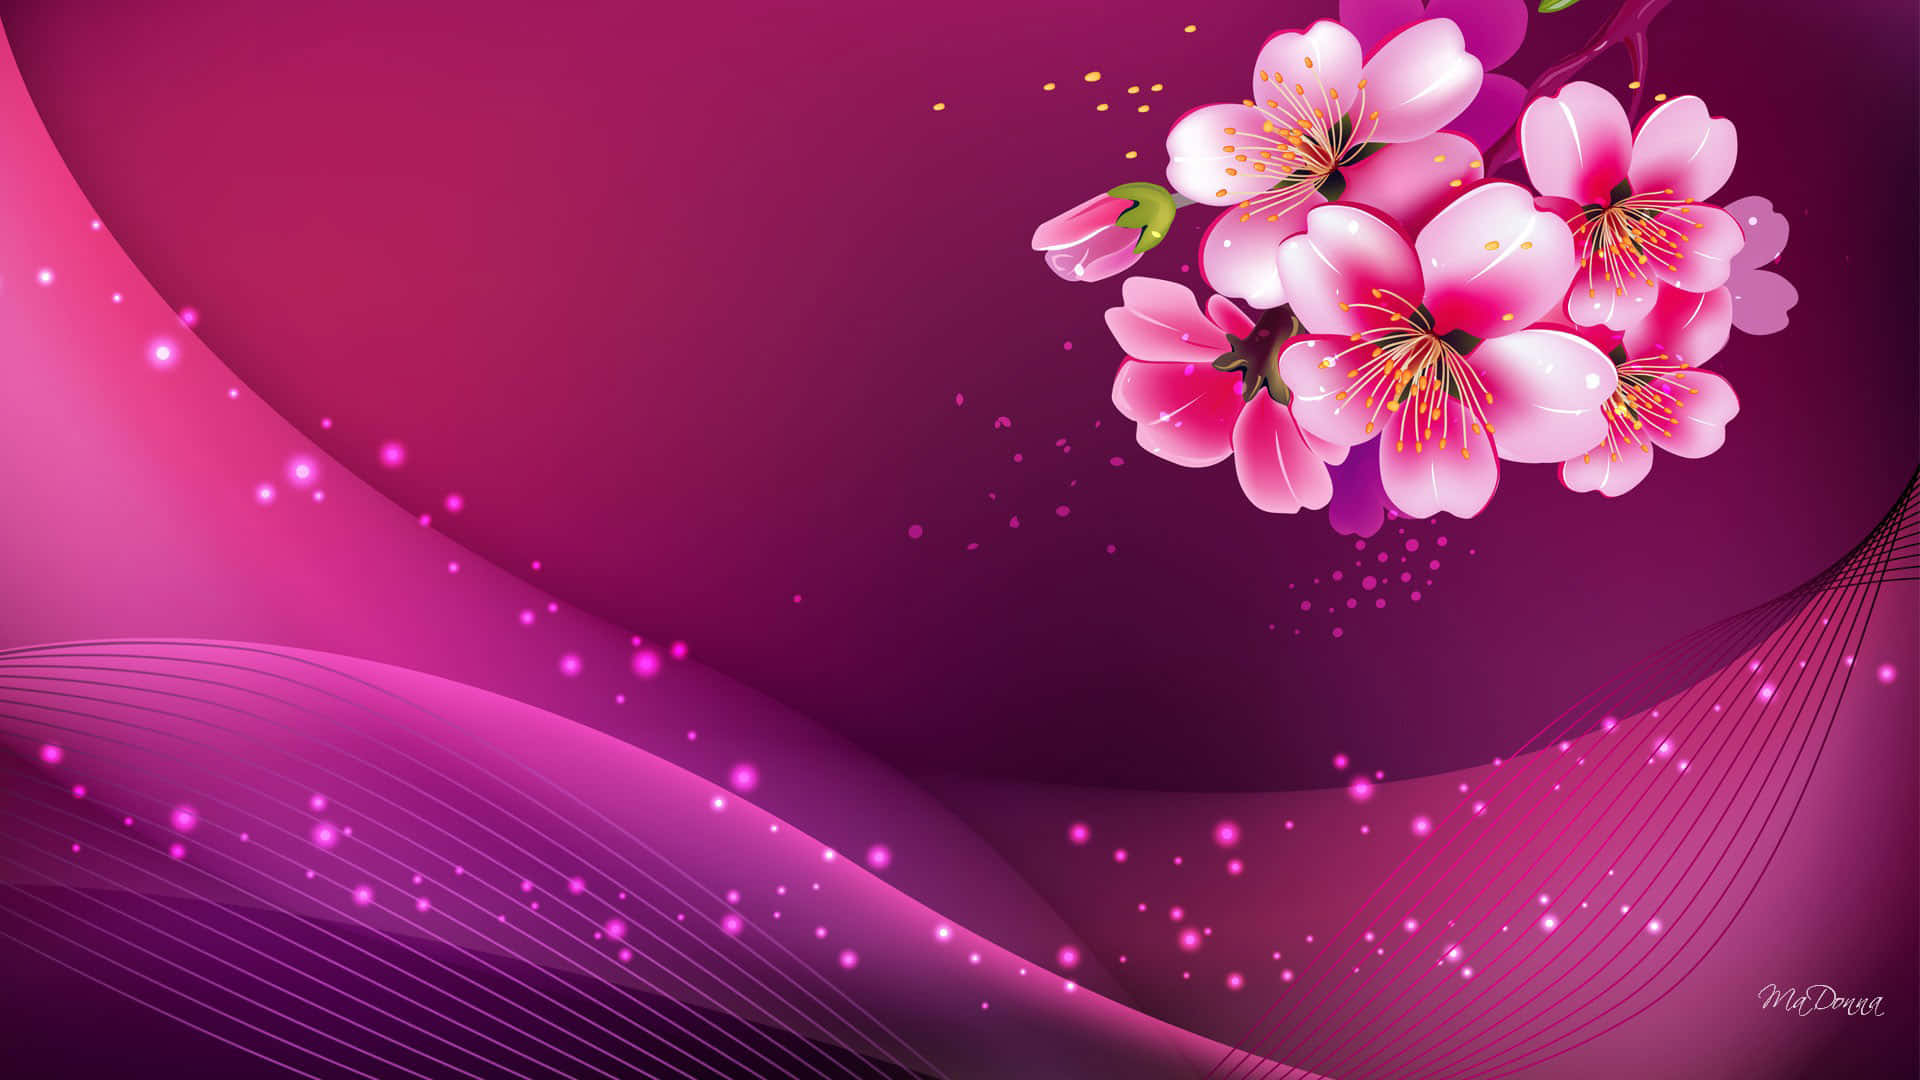 Stand Out Confidently With a Vibrant Magenta Background